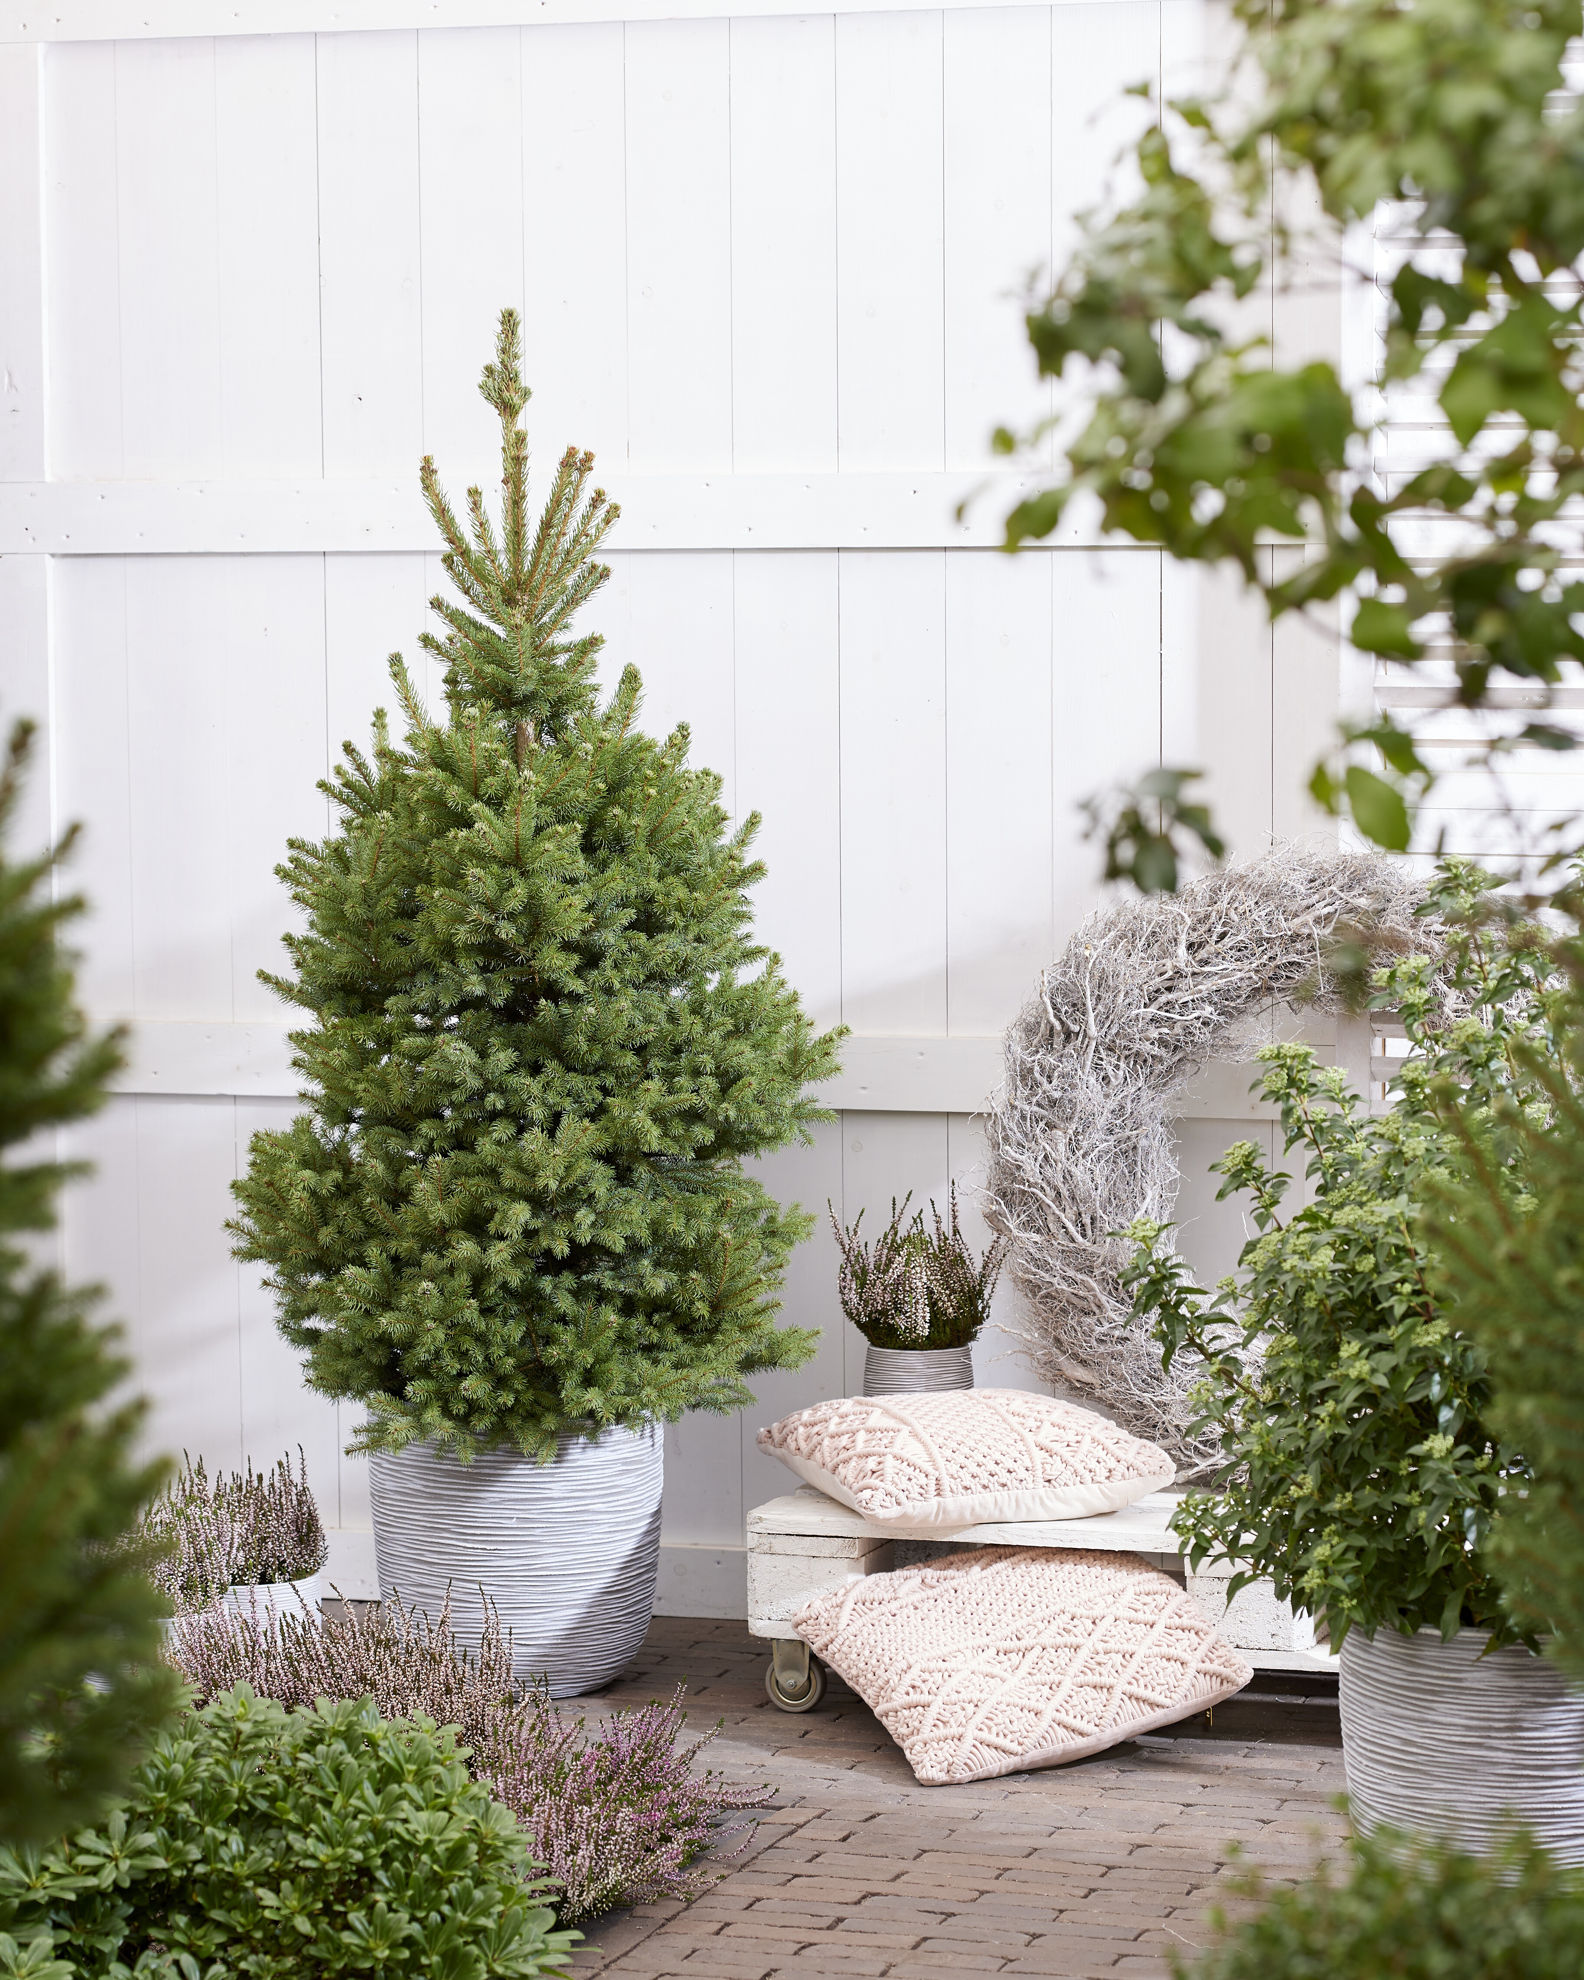 http://www.breederplants.nl/images/thumbs/0002176_picea.jpeg